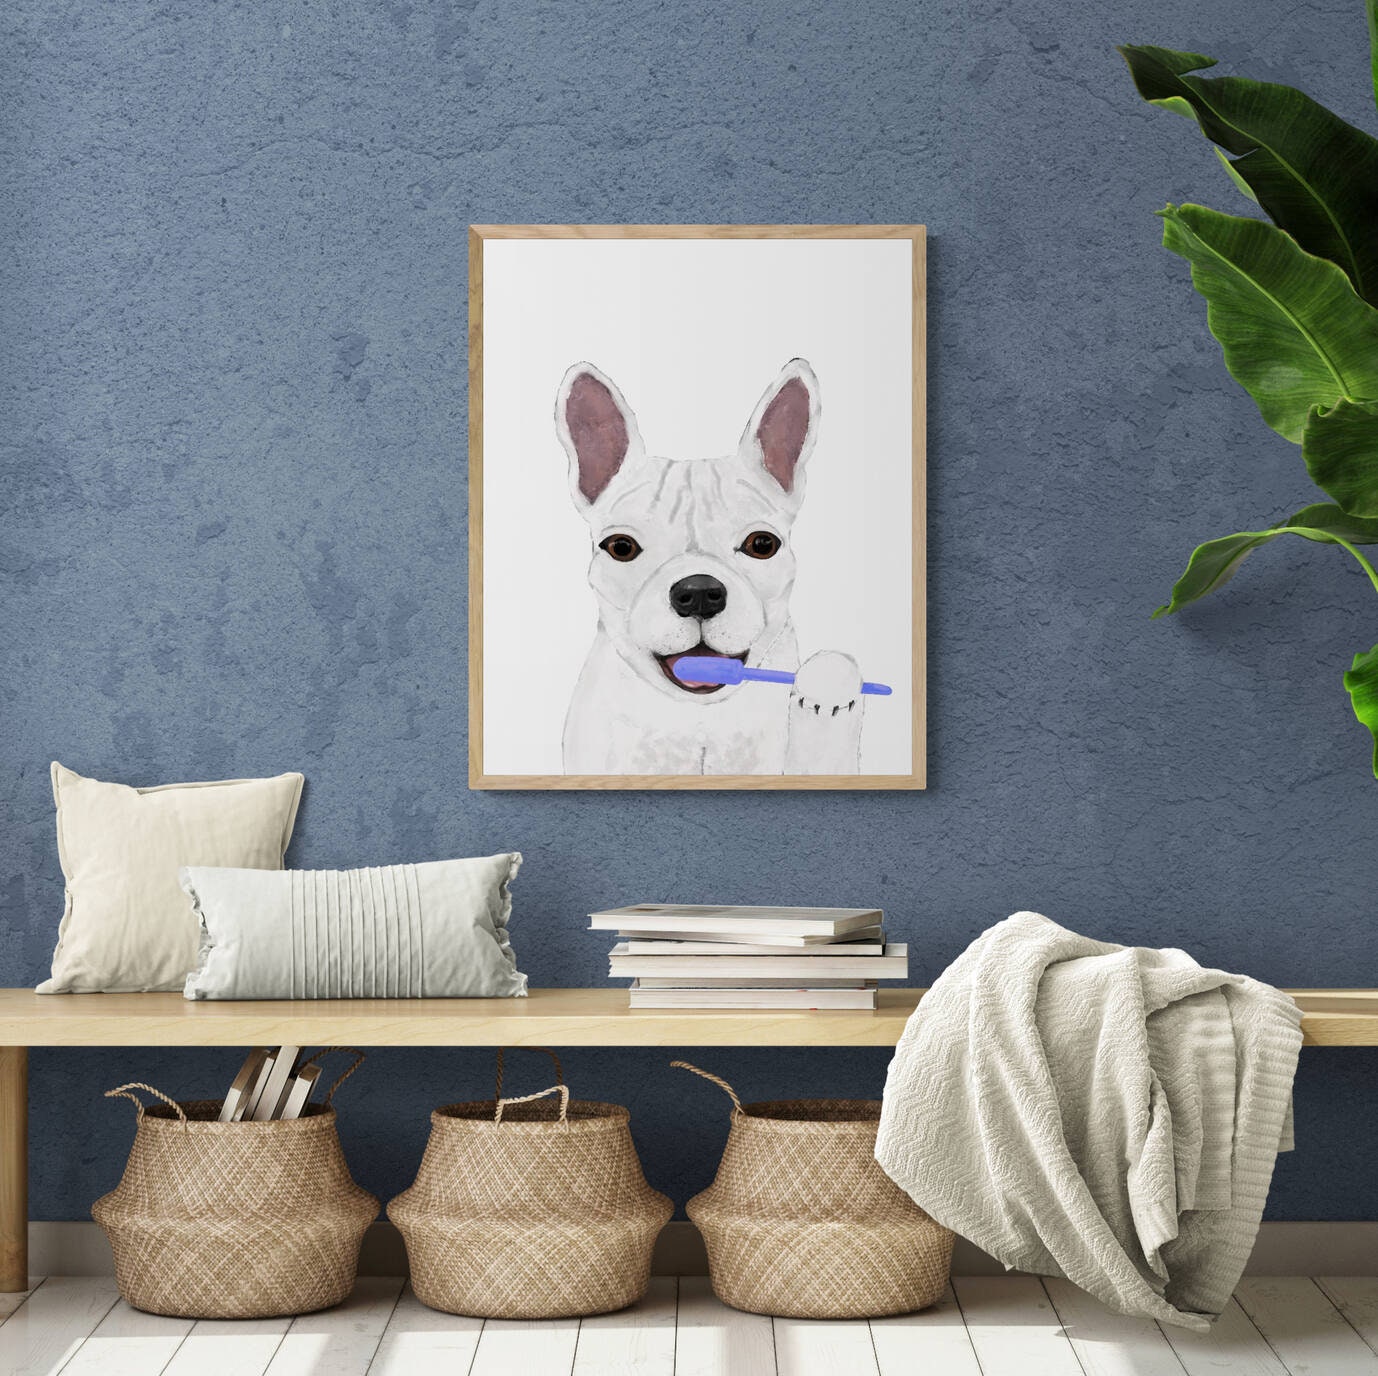 French Bulldog Brushing Teeth Print, White Frenchie with Toothbrush, Bathroom Wall Art, Dog Painting, Dog In Bath Illustration, Dog Lover